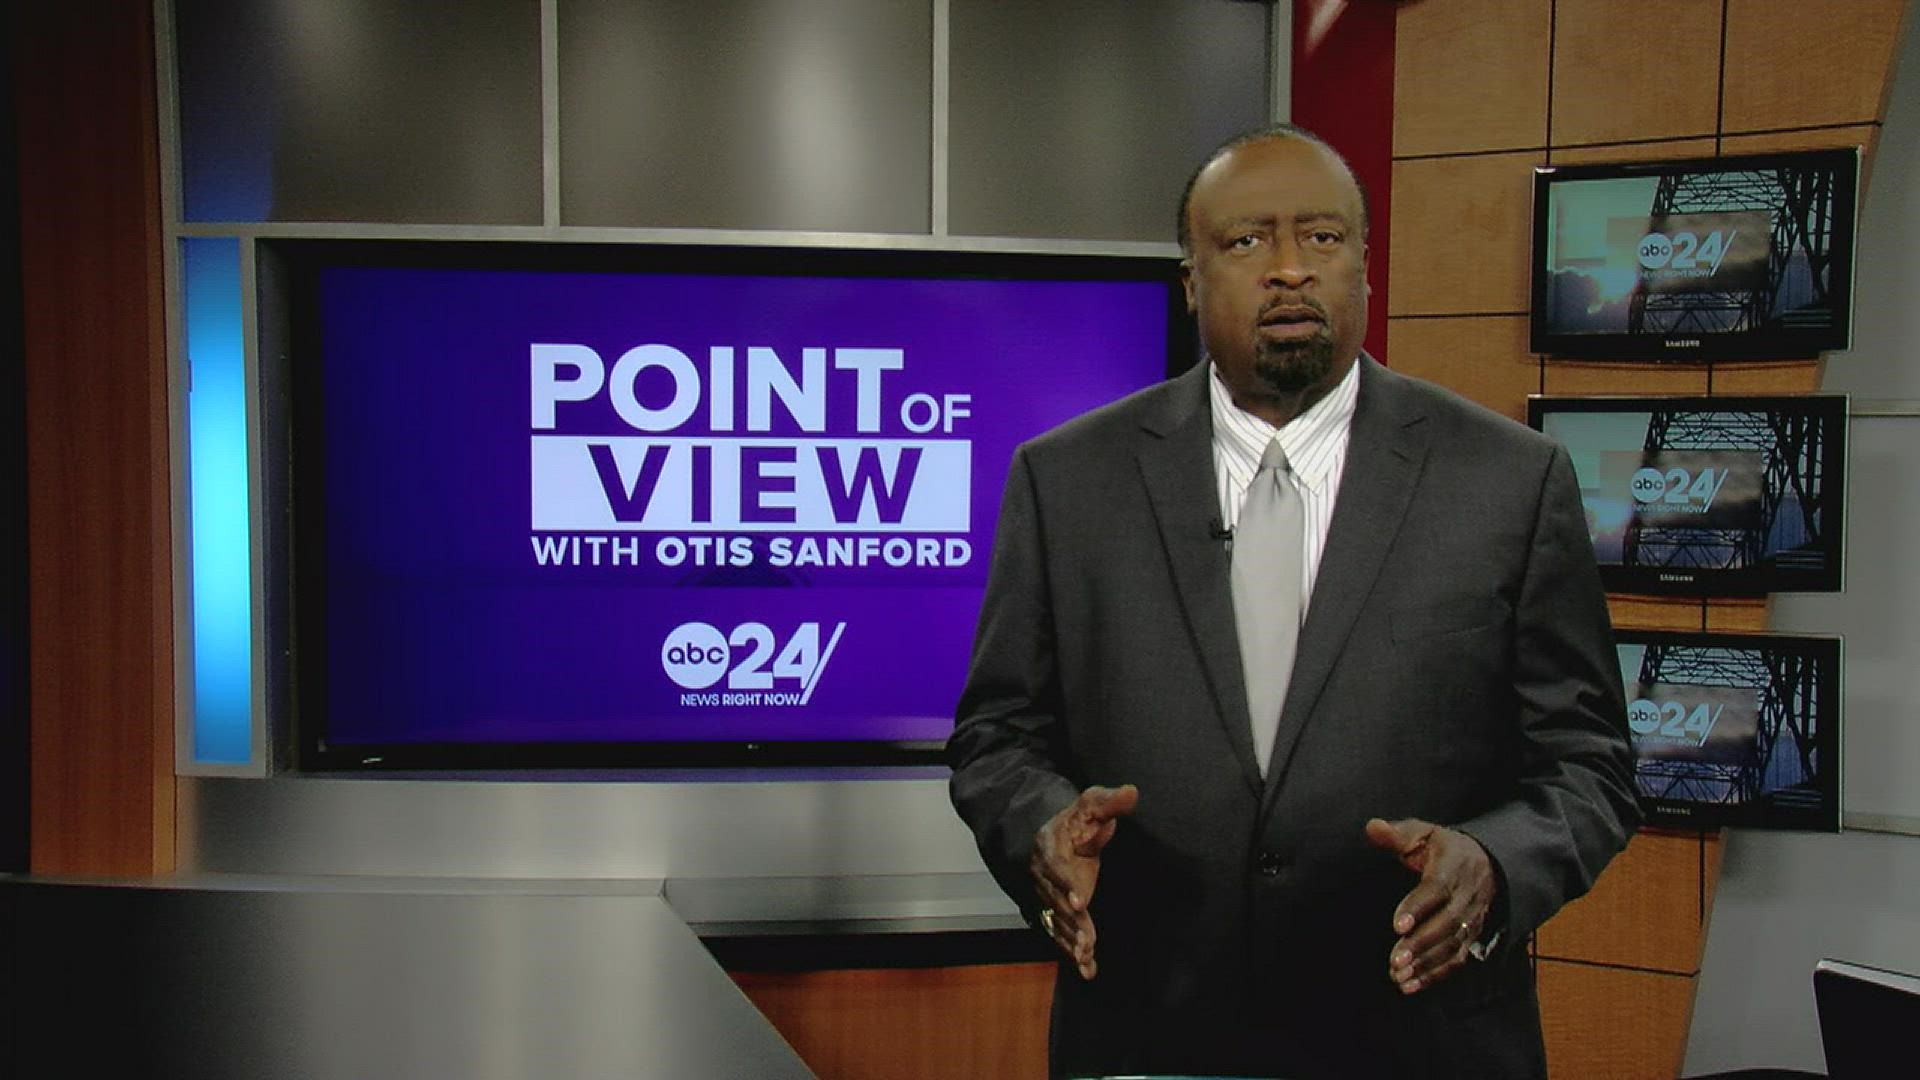 ABC 24 Political analyst and commentator Otis Sanford shared his point of view on learning about systemic racism in the classroom.